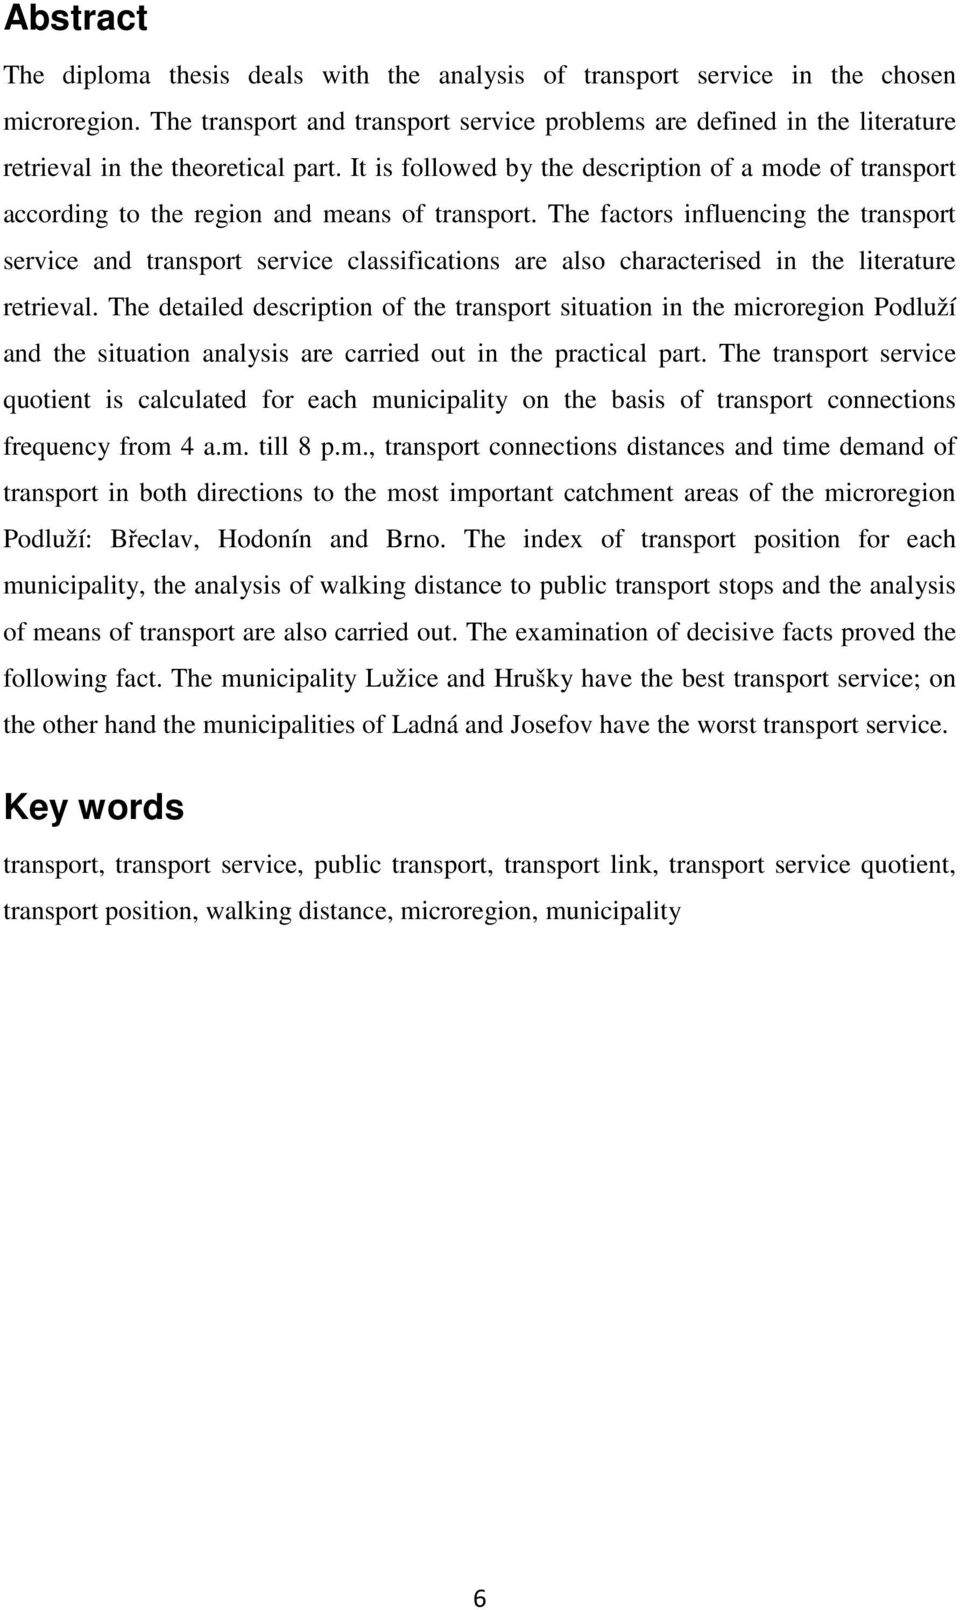 It is followed by the description of a mode of transport according to the region and means of transport.